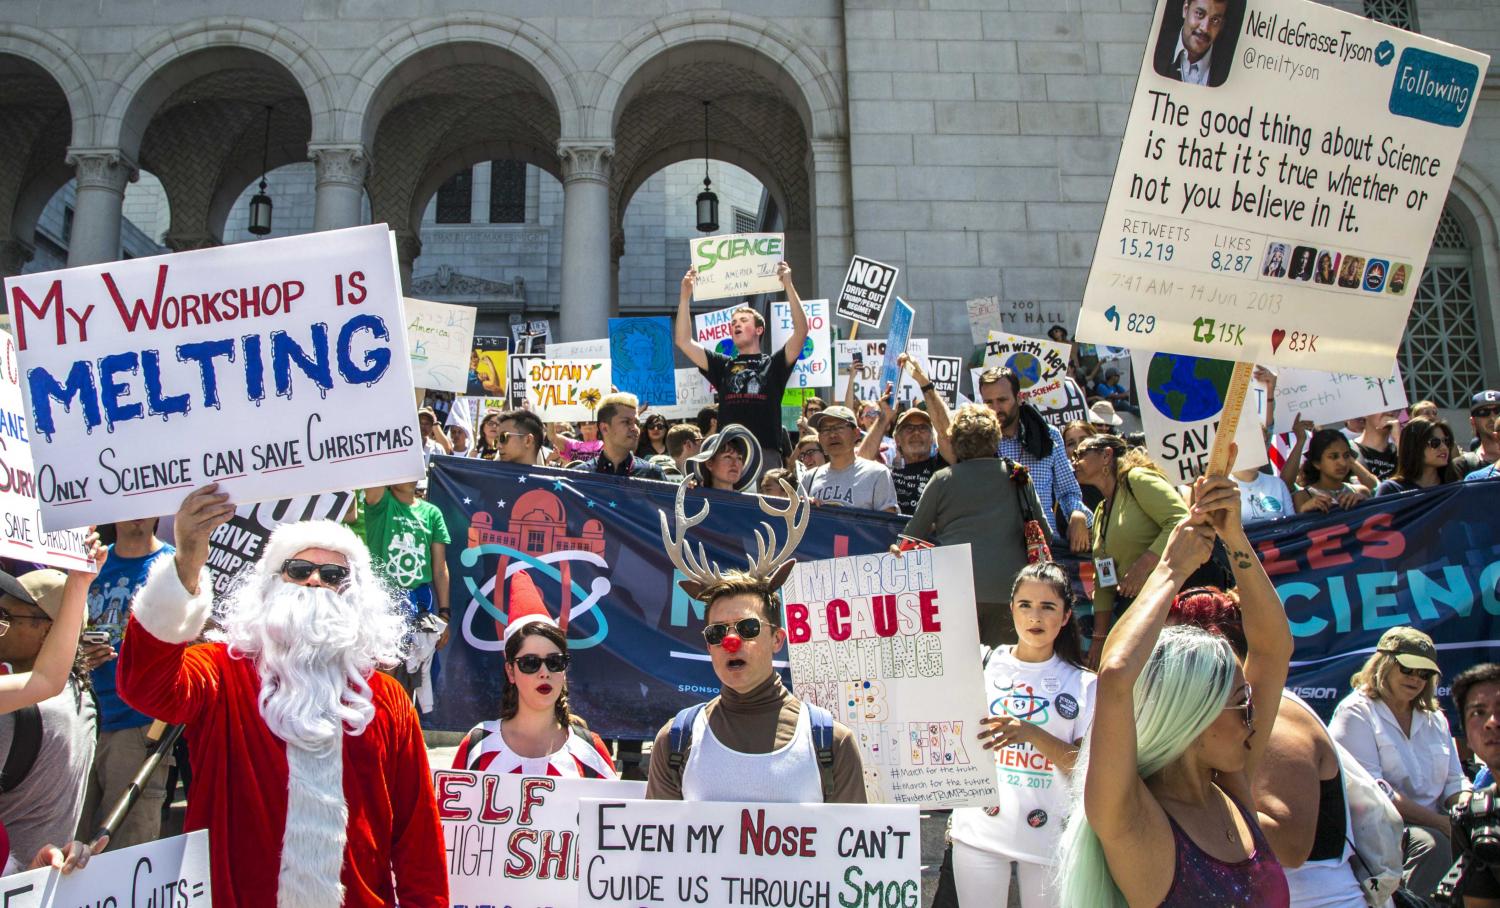  Thousands of protesters arrive at Los Angles City Hall and make their presence felt by chanting and holding up their signs as they wait for key speakers during the March for Science event in downtown Los Angles, California, on Saturday, April 22 201